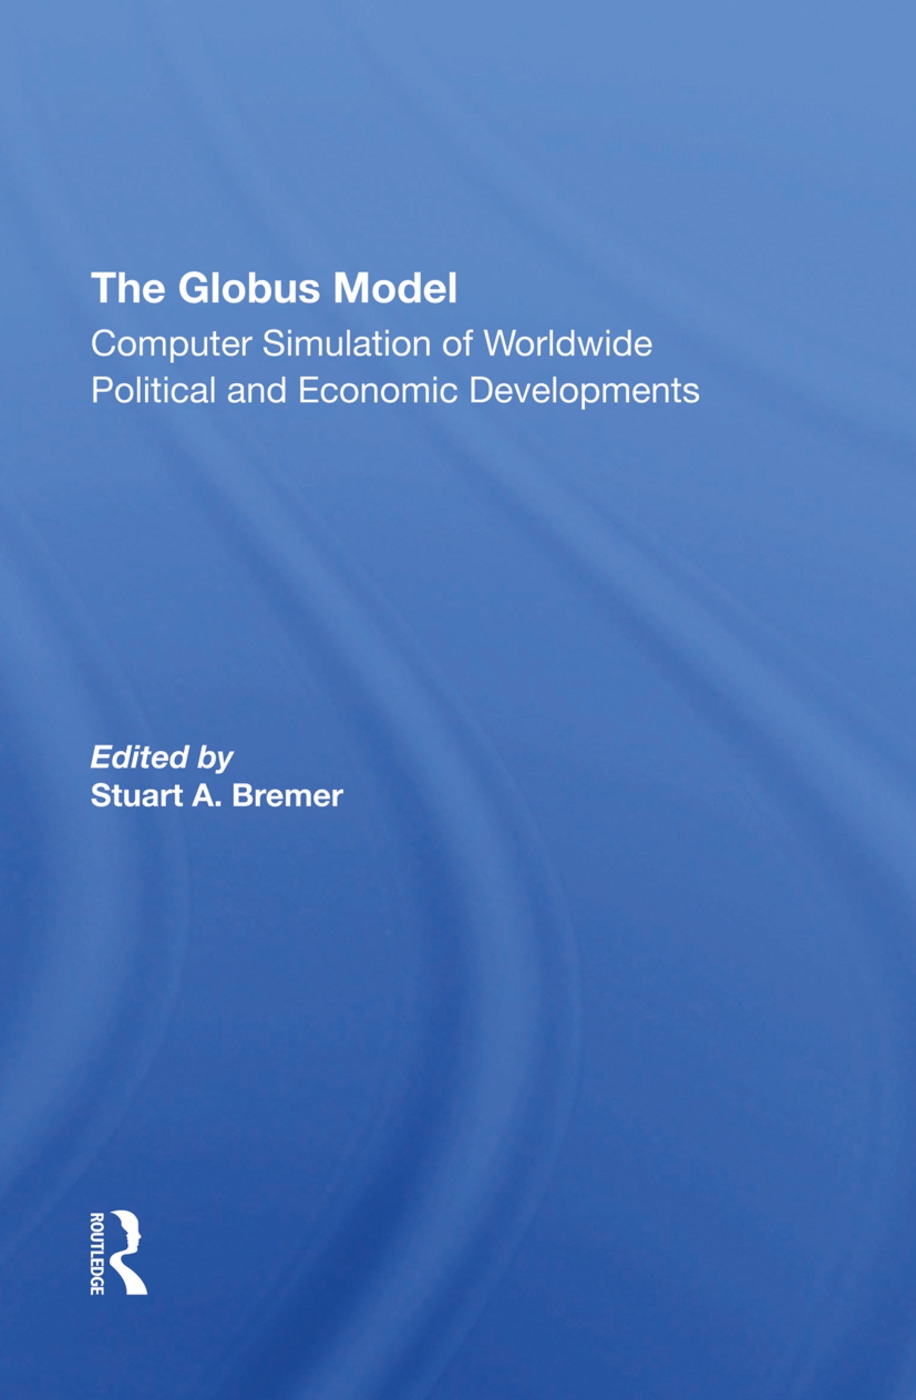 The Globus Model: Computer Simulation of Worldwide Political and Economic Developments